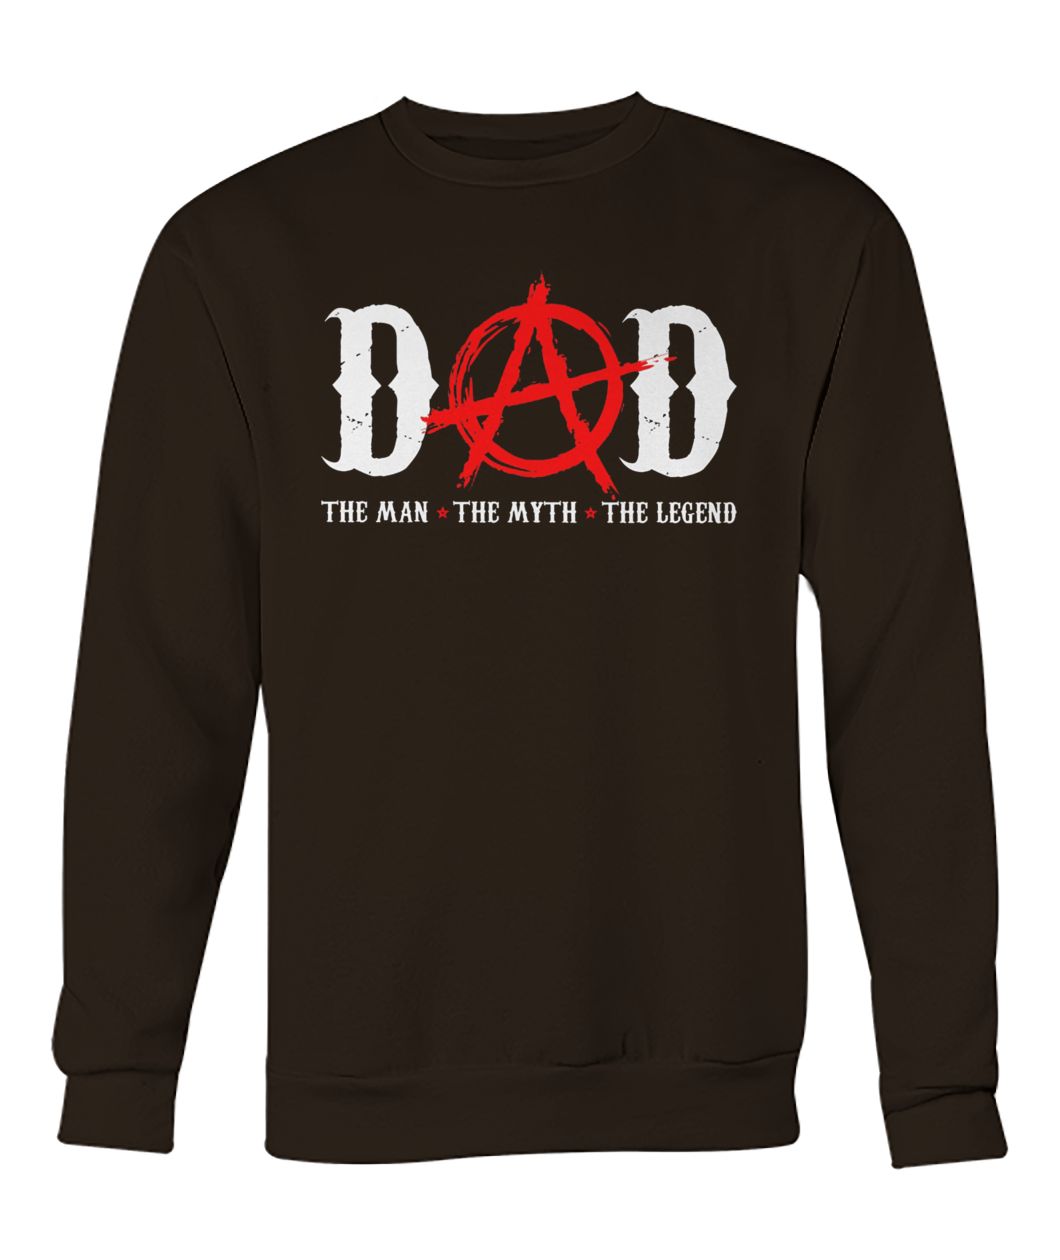 Dad the man the myth the legend father's day crew neck sweatshirt